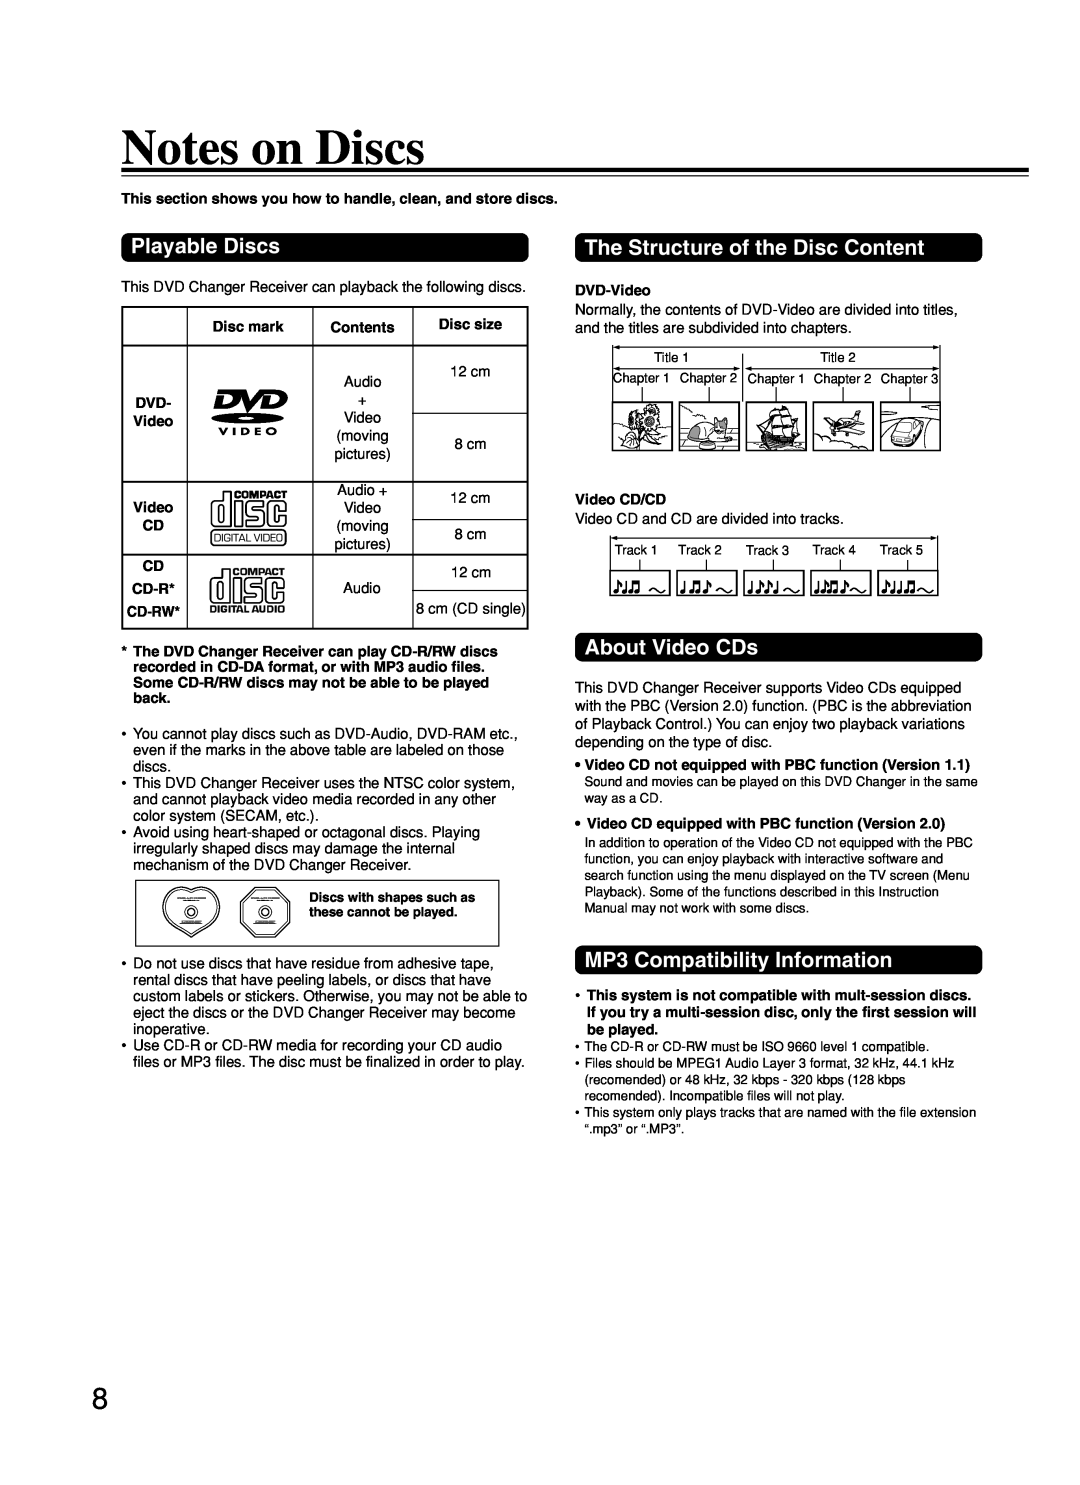 Onkyo DR-C500 Notes on Discs, Playable Discs, The Structure of the Disc Content, About Video CDs, Disc mark, Contents 